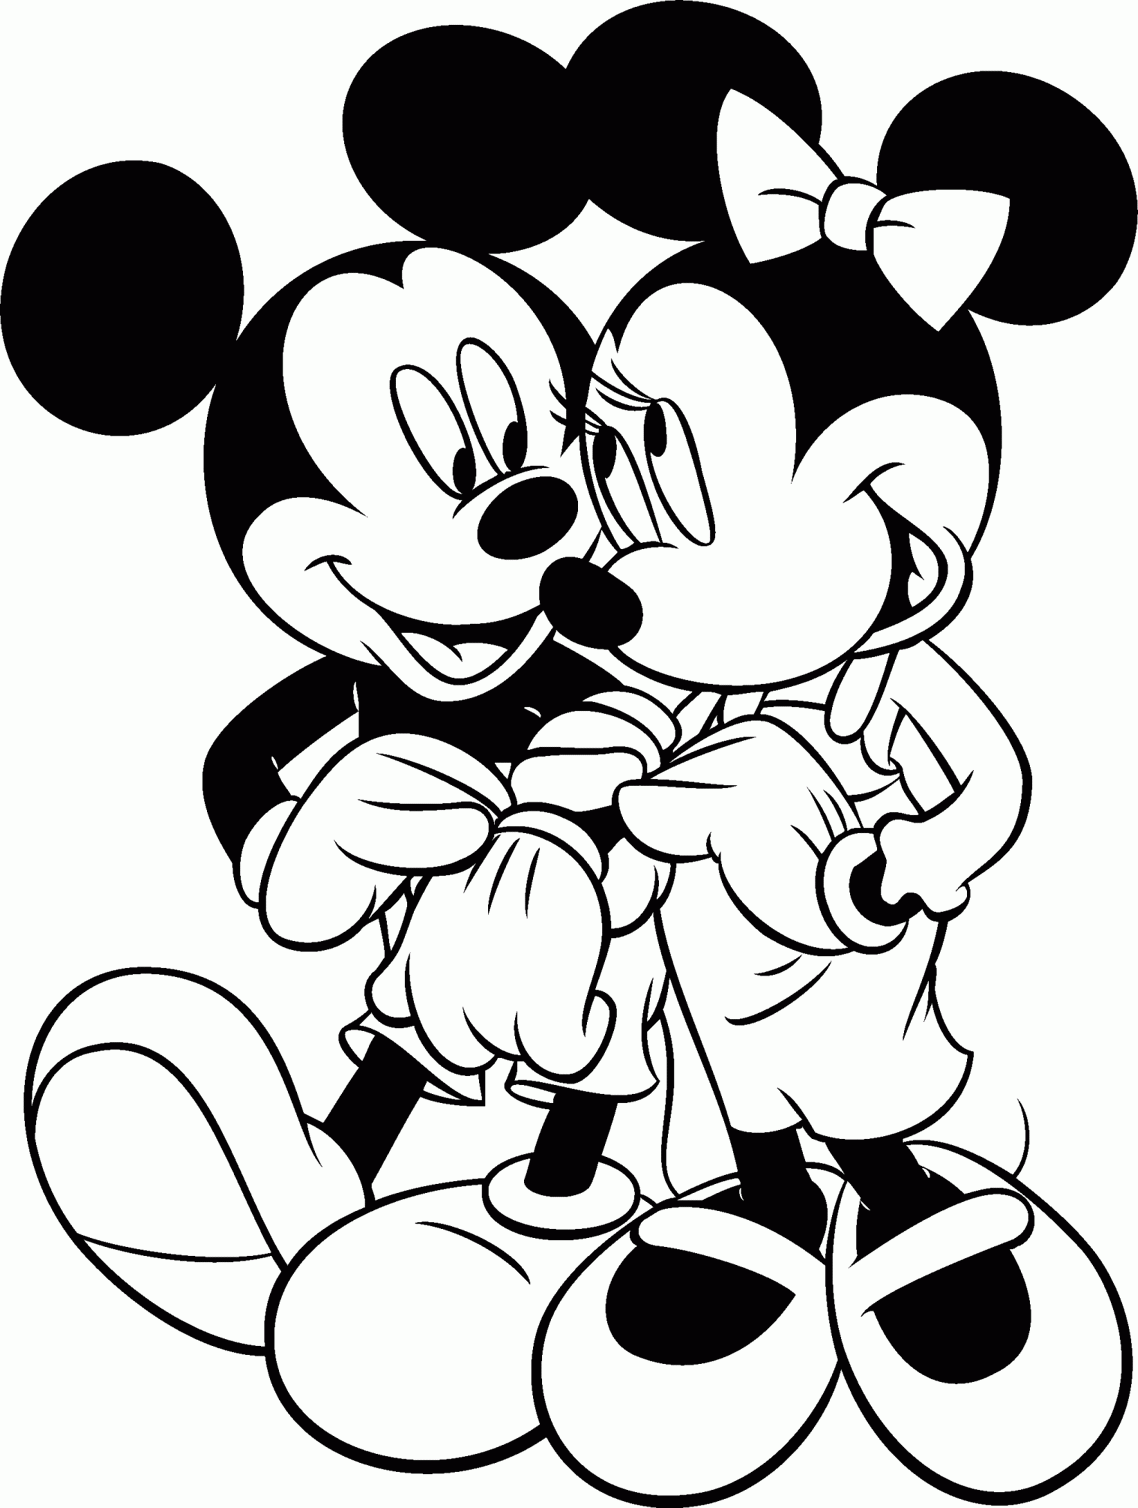 Mickey Mouse Coloring Pages Printable Pdf Explore The World Of Disney With These Free Mickey